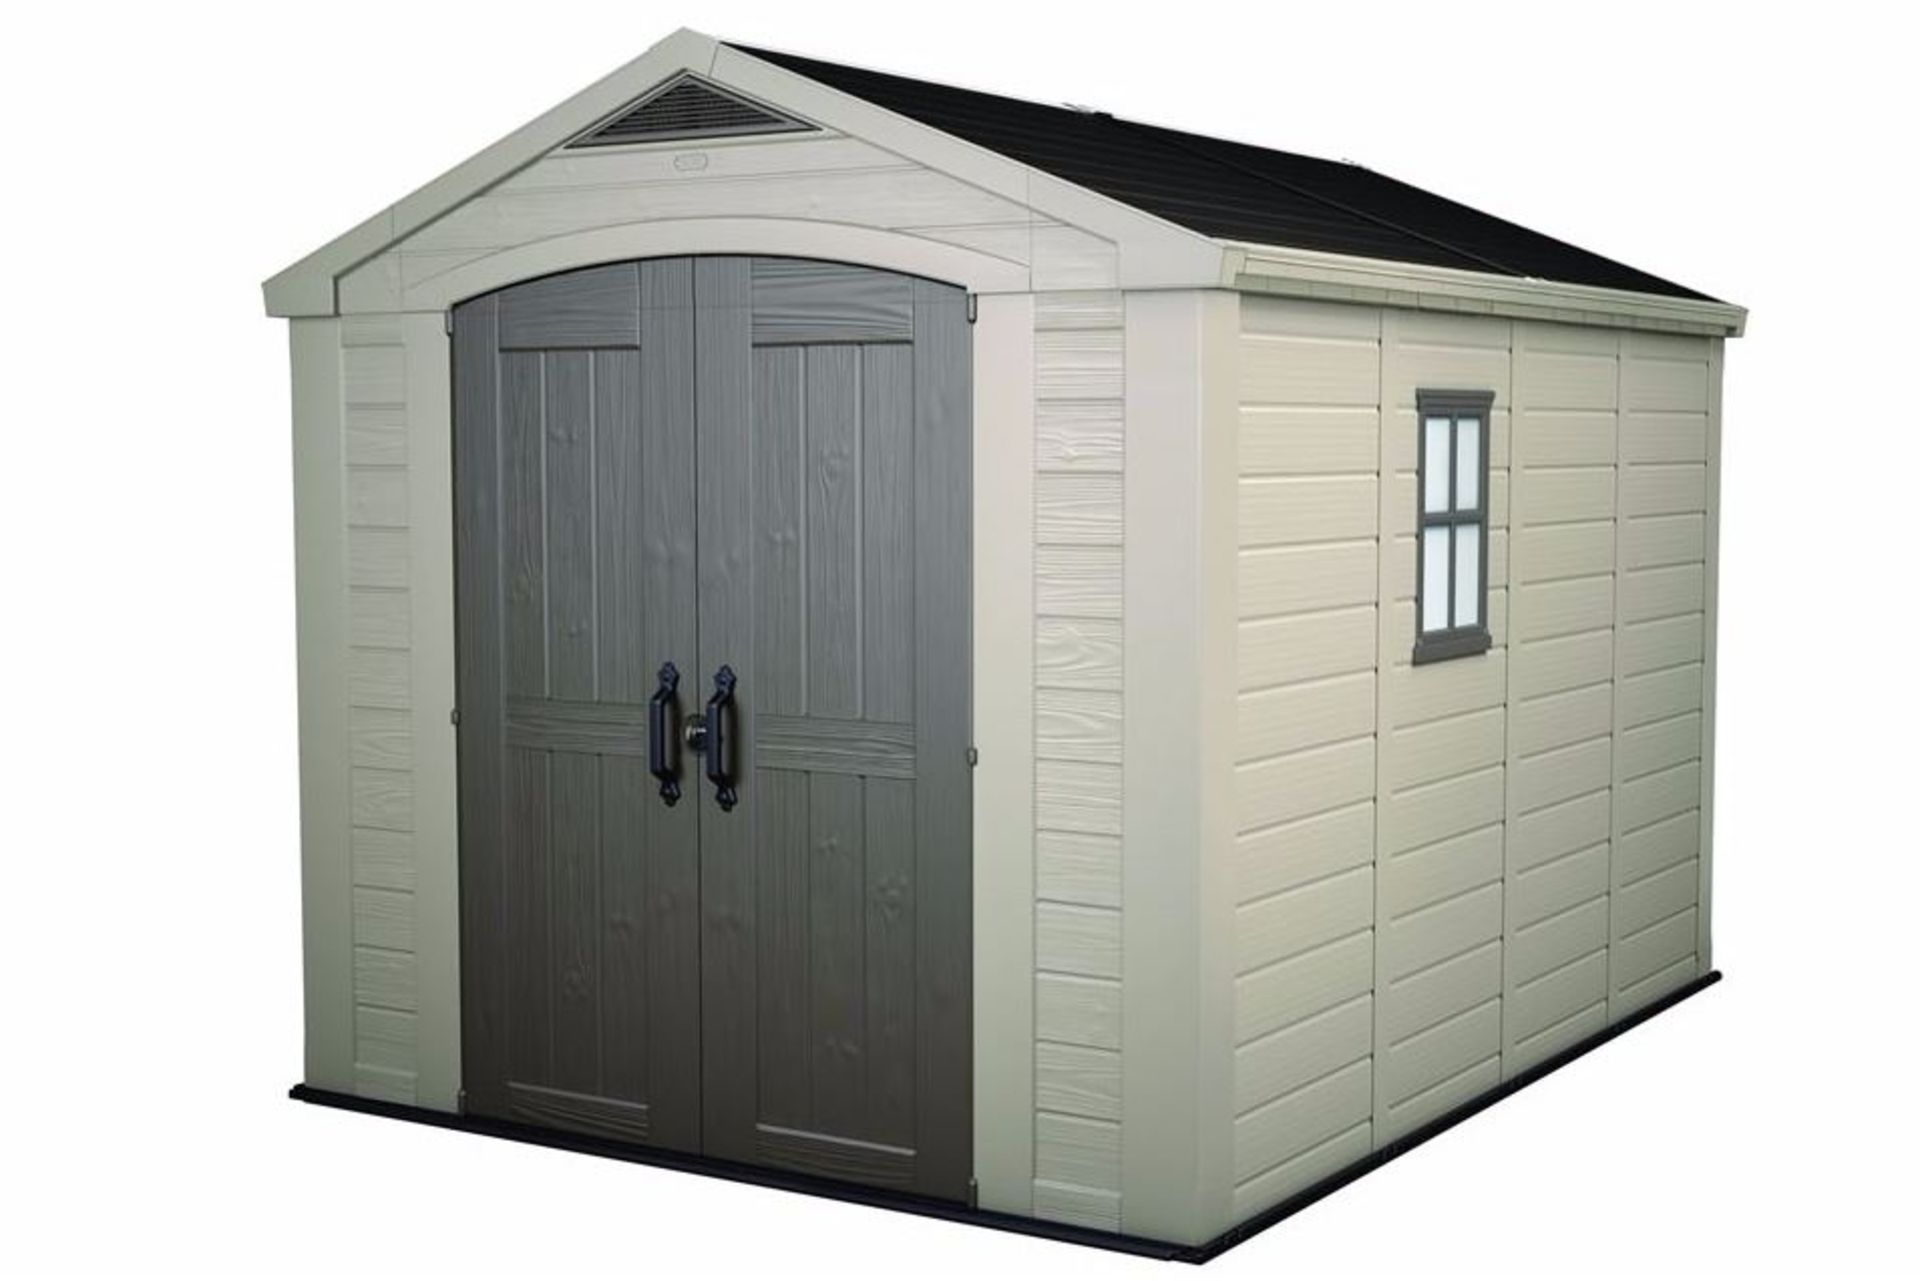 Keter Factor 8 x 11 Shed RRP £899 - Image 3 of 5